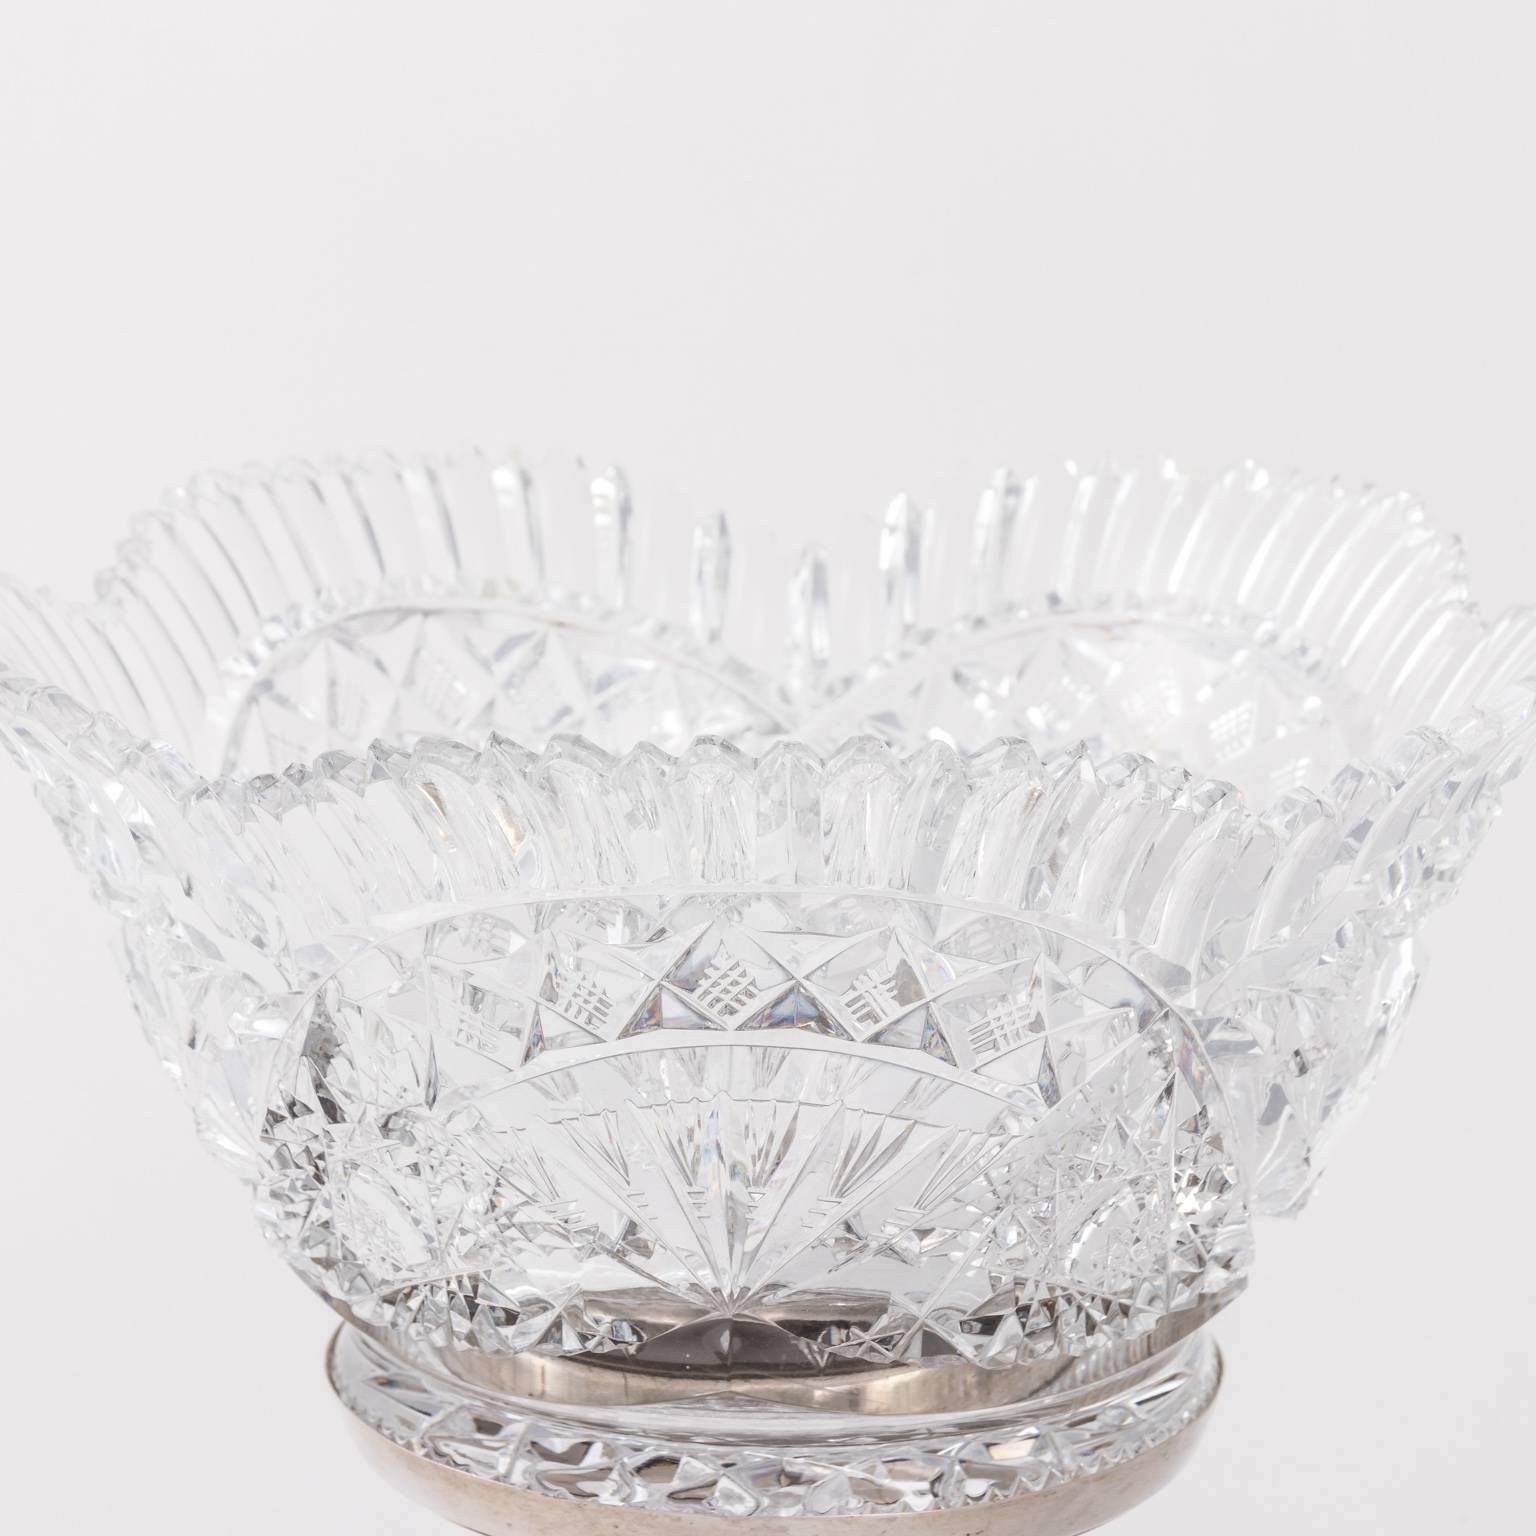 Cut-Glass Punch Bowl on 800 Sterling Silver Base For Sale 4